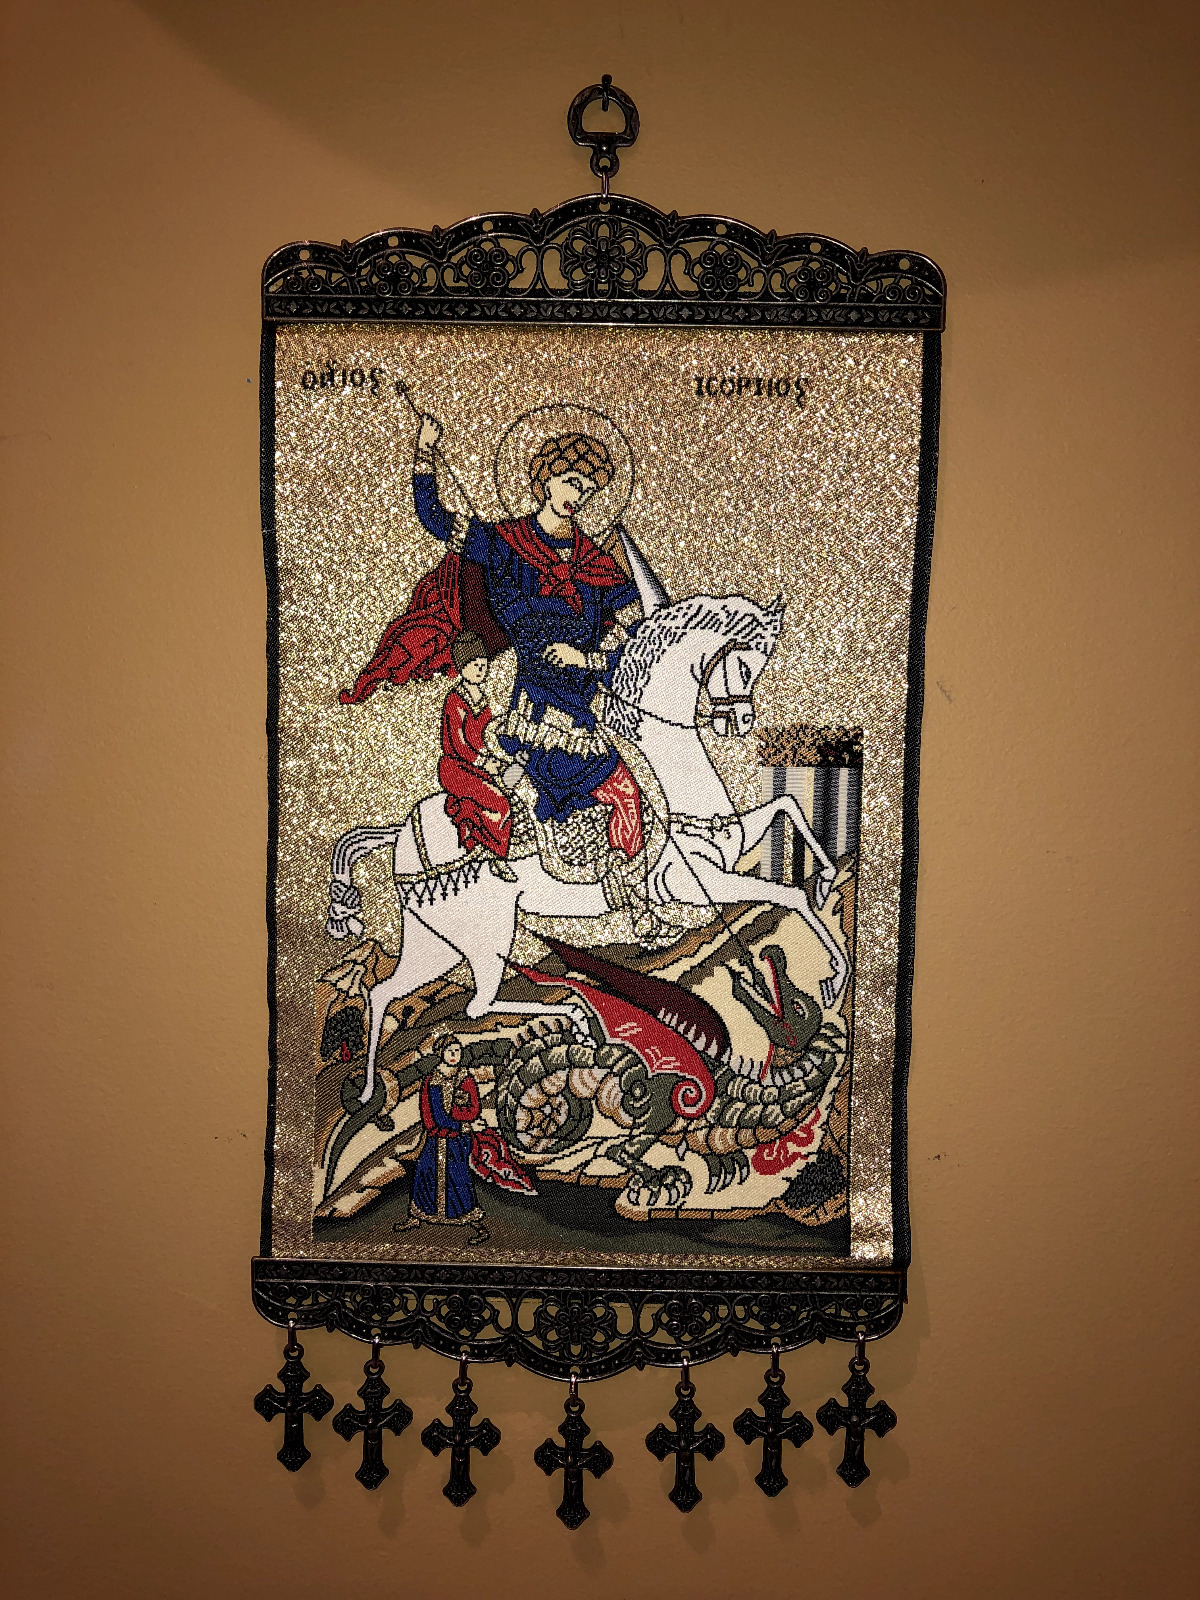 Saint St George Orthodox Icon Tapestry Banner with Bar Crosses - Larger Version